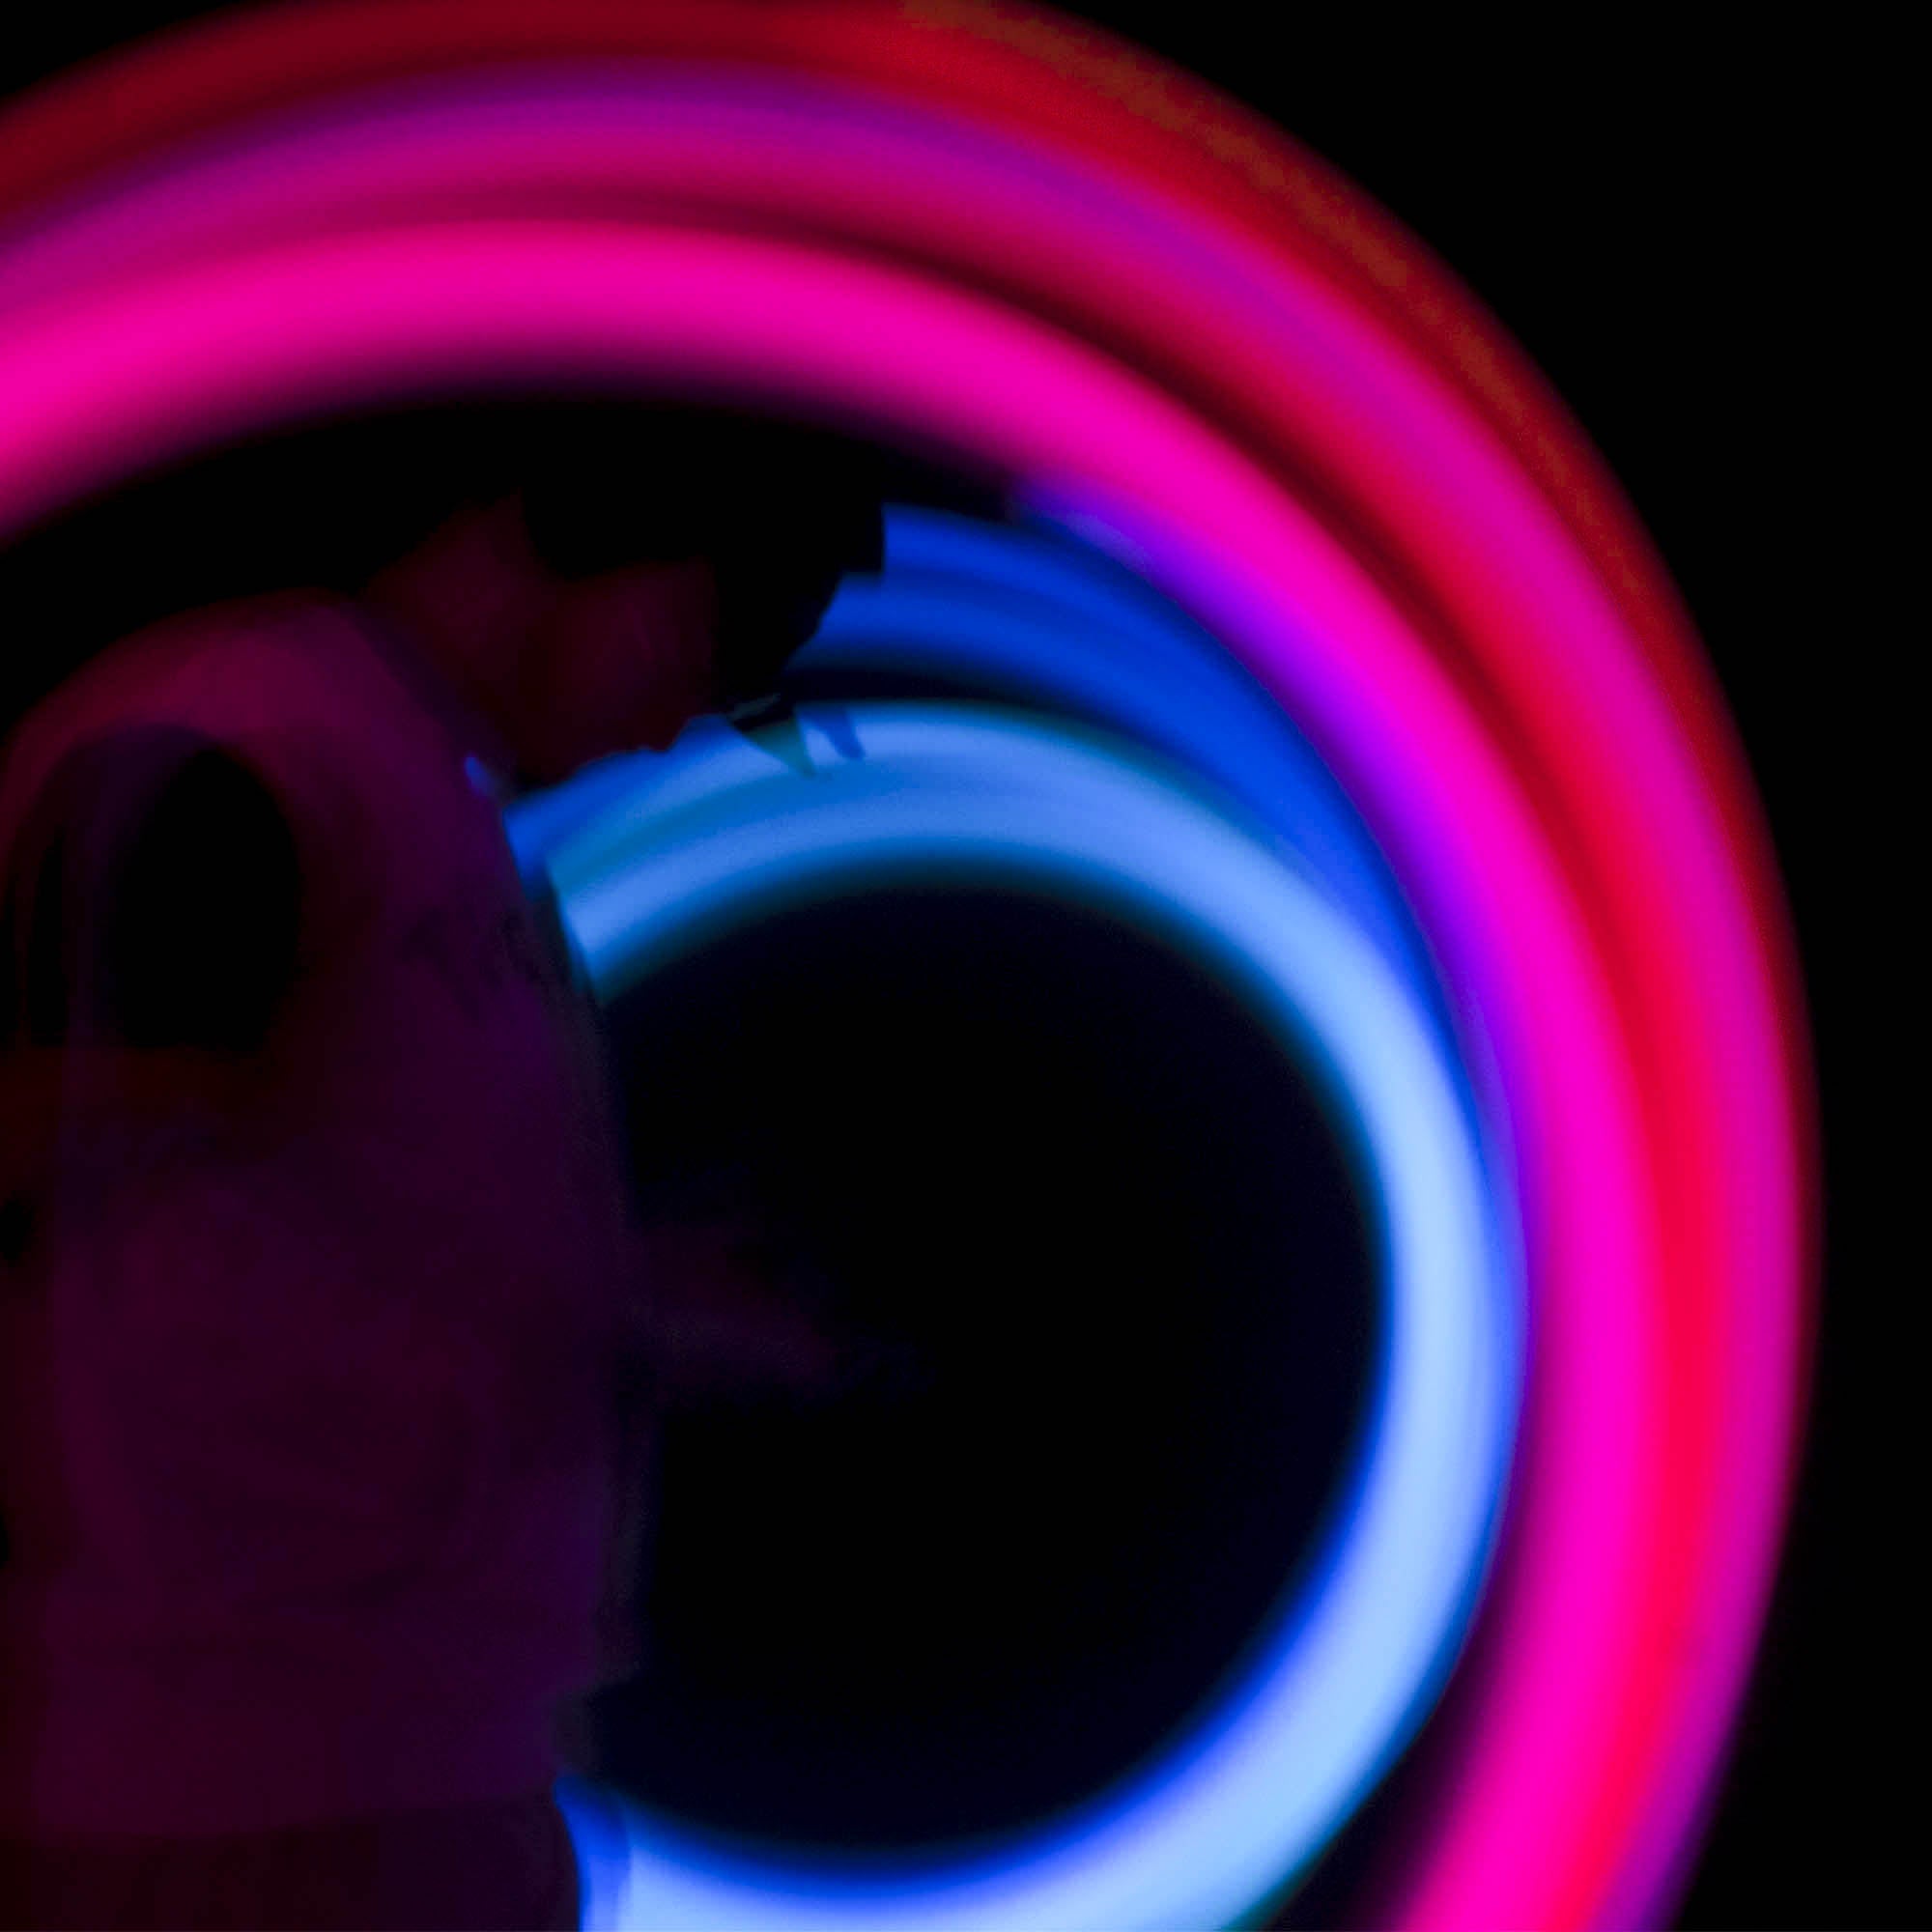 LED poi spinning with light trails